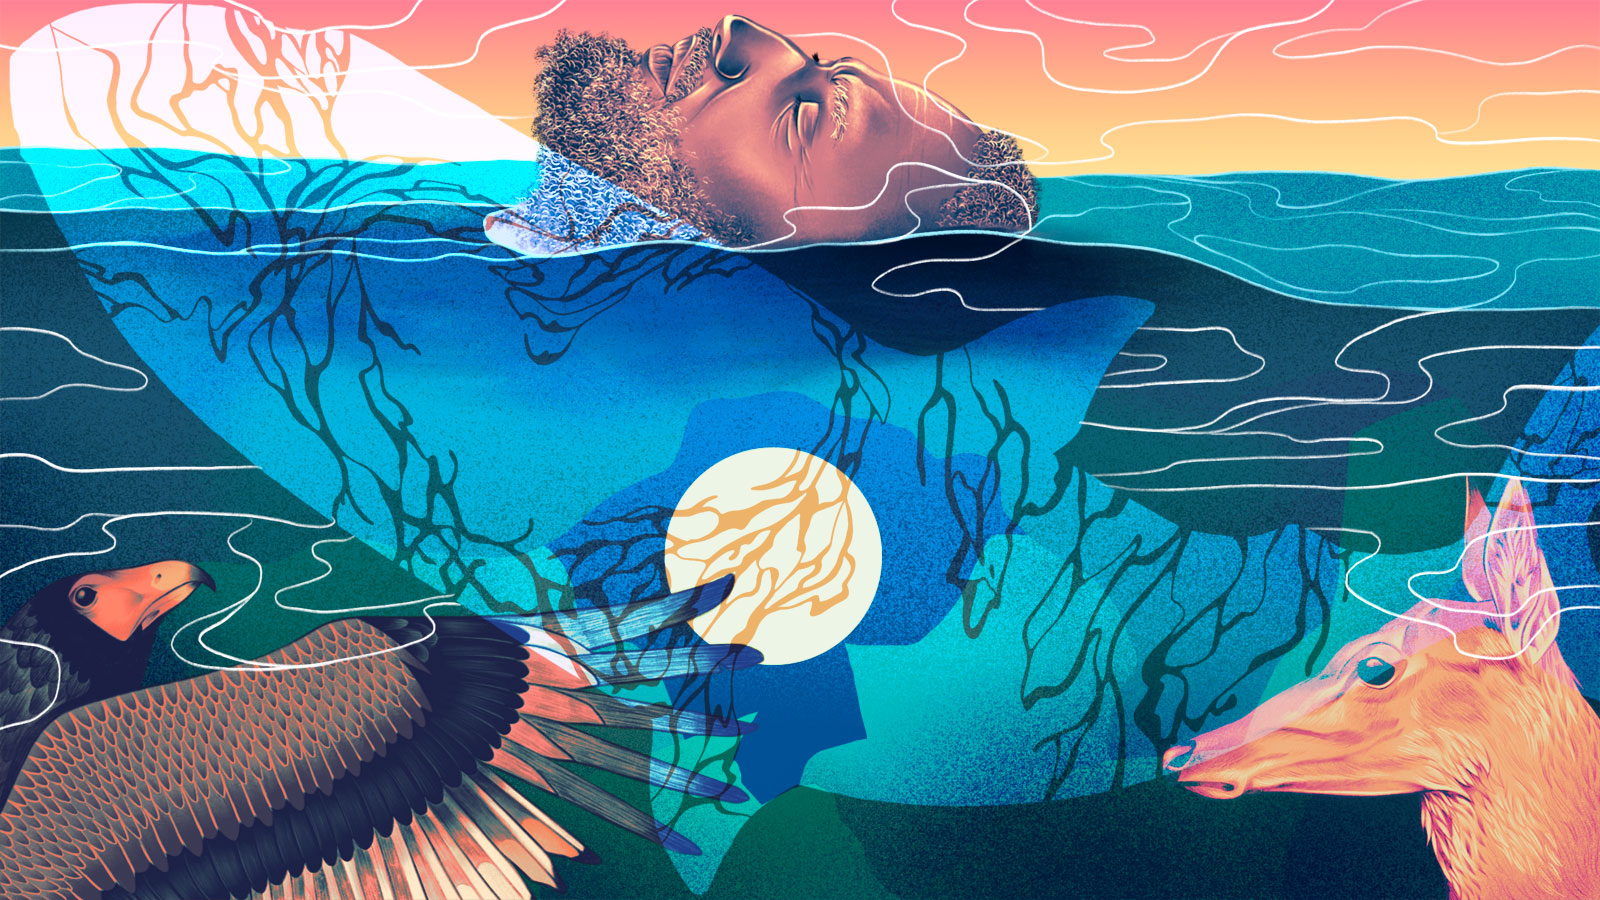 Illustration with vibrant colors depicting images of a human, a Greenland shark, a doe, and an eagle, connected by water